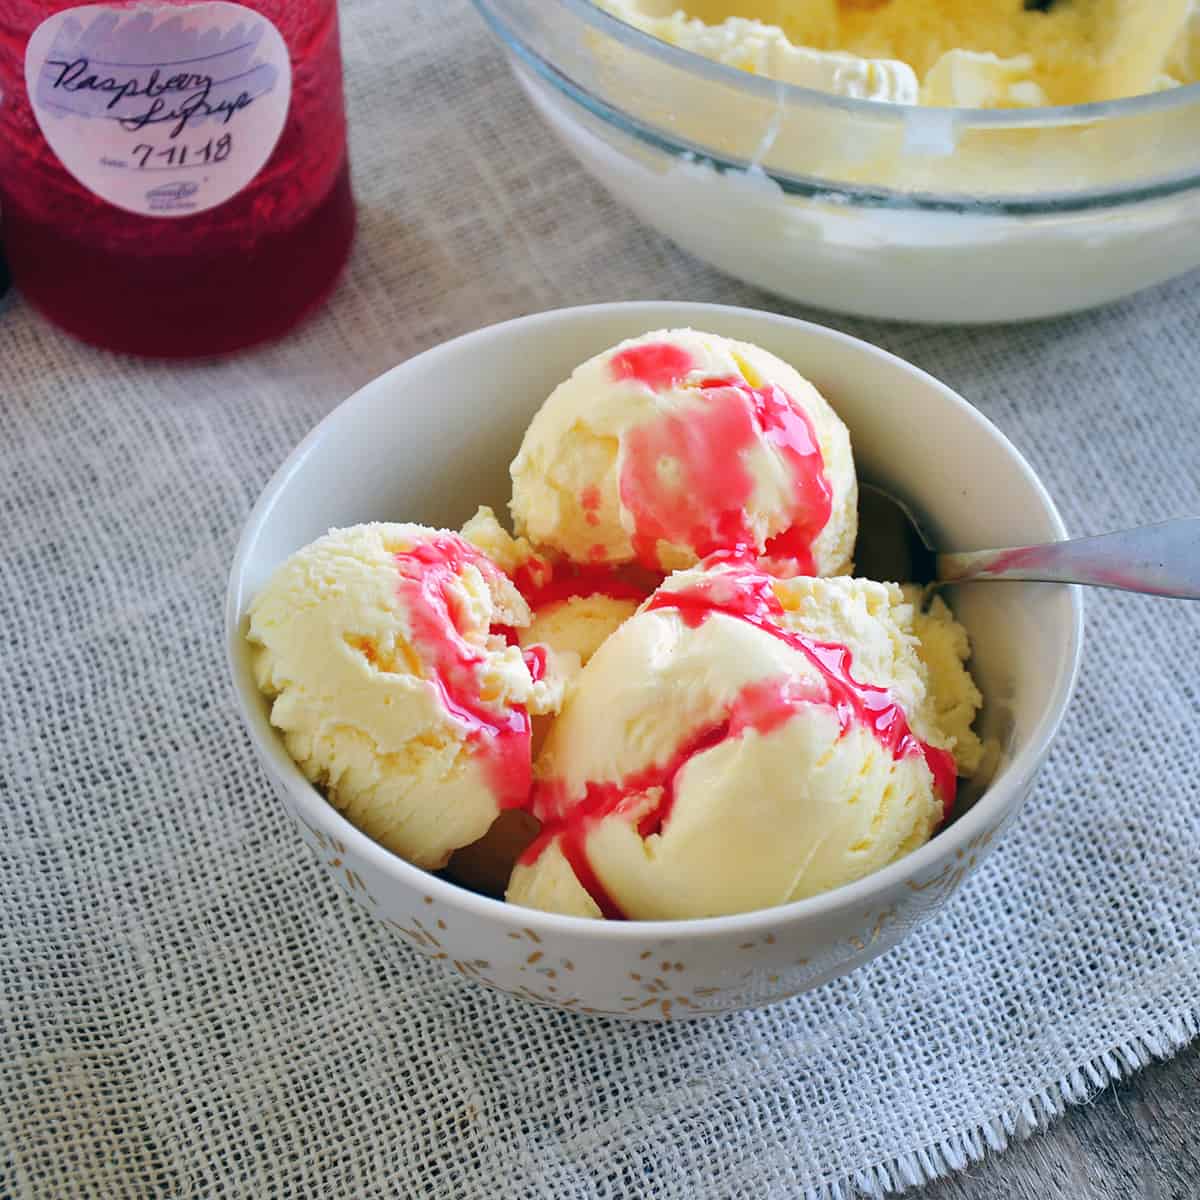 Bowl of vanilla ice cream with raspberry topping.